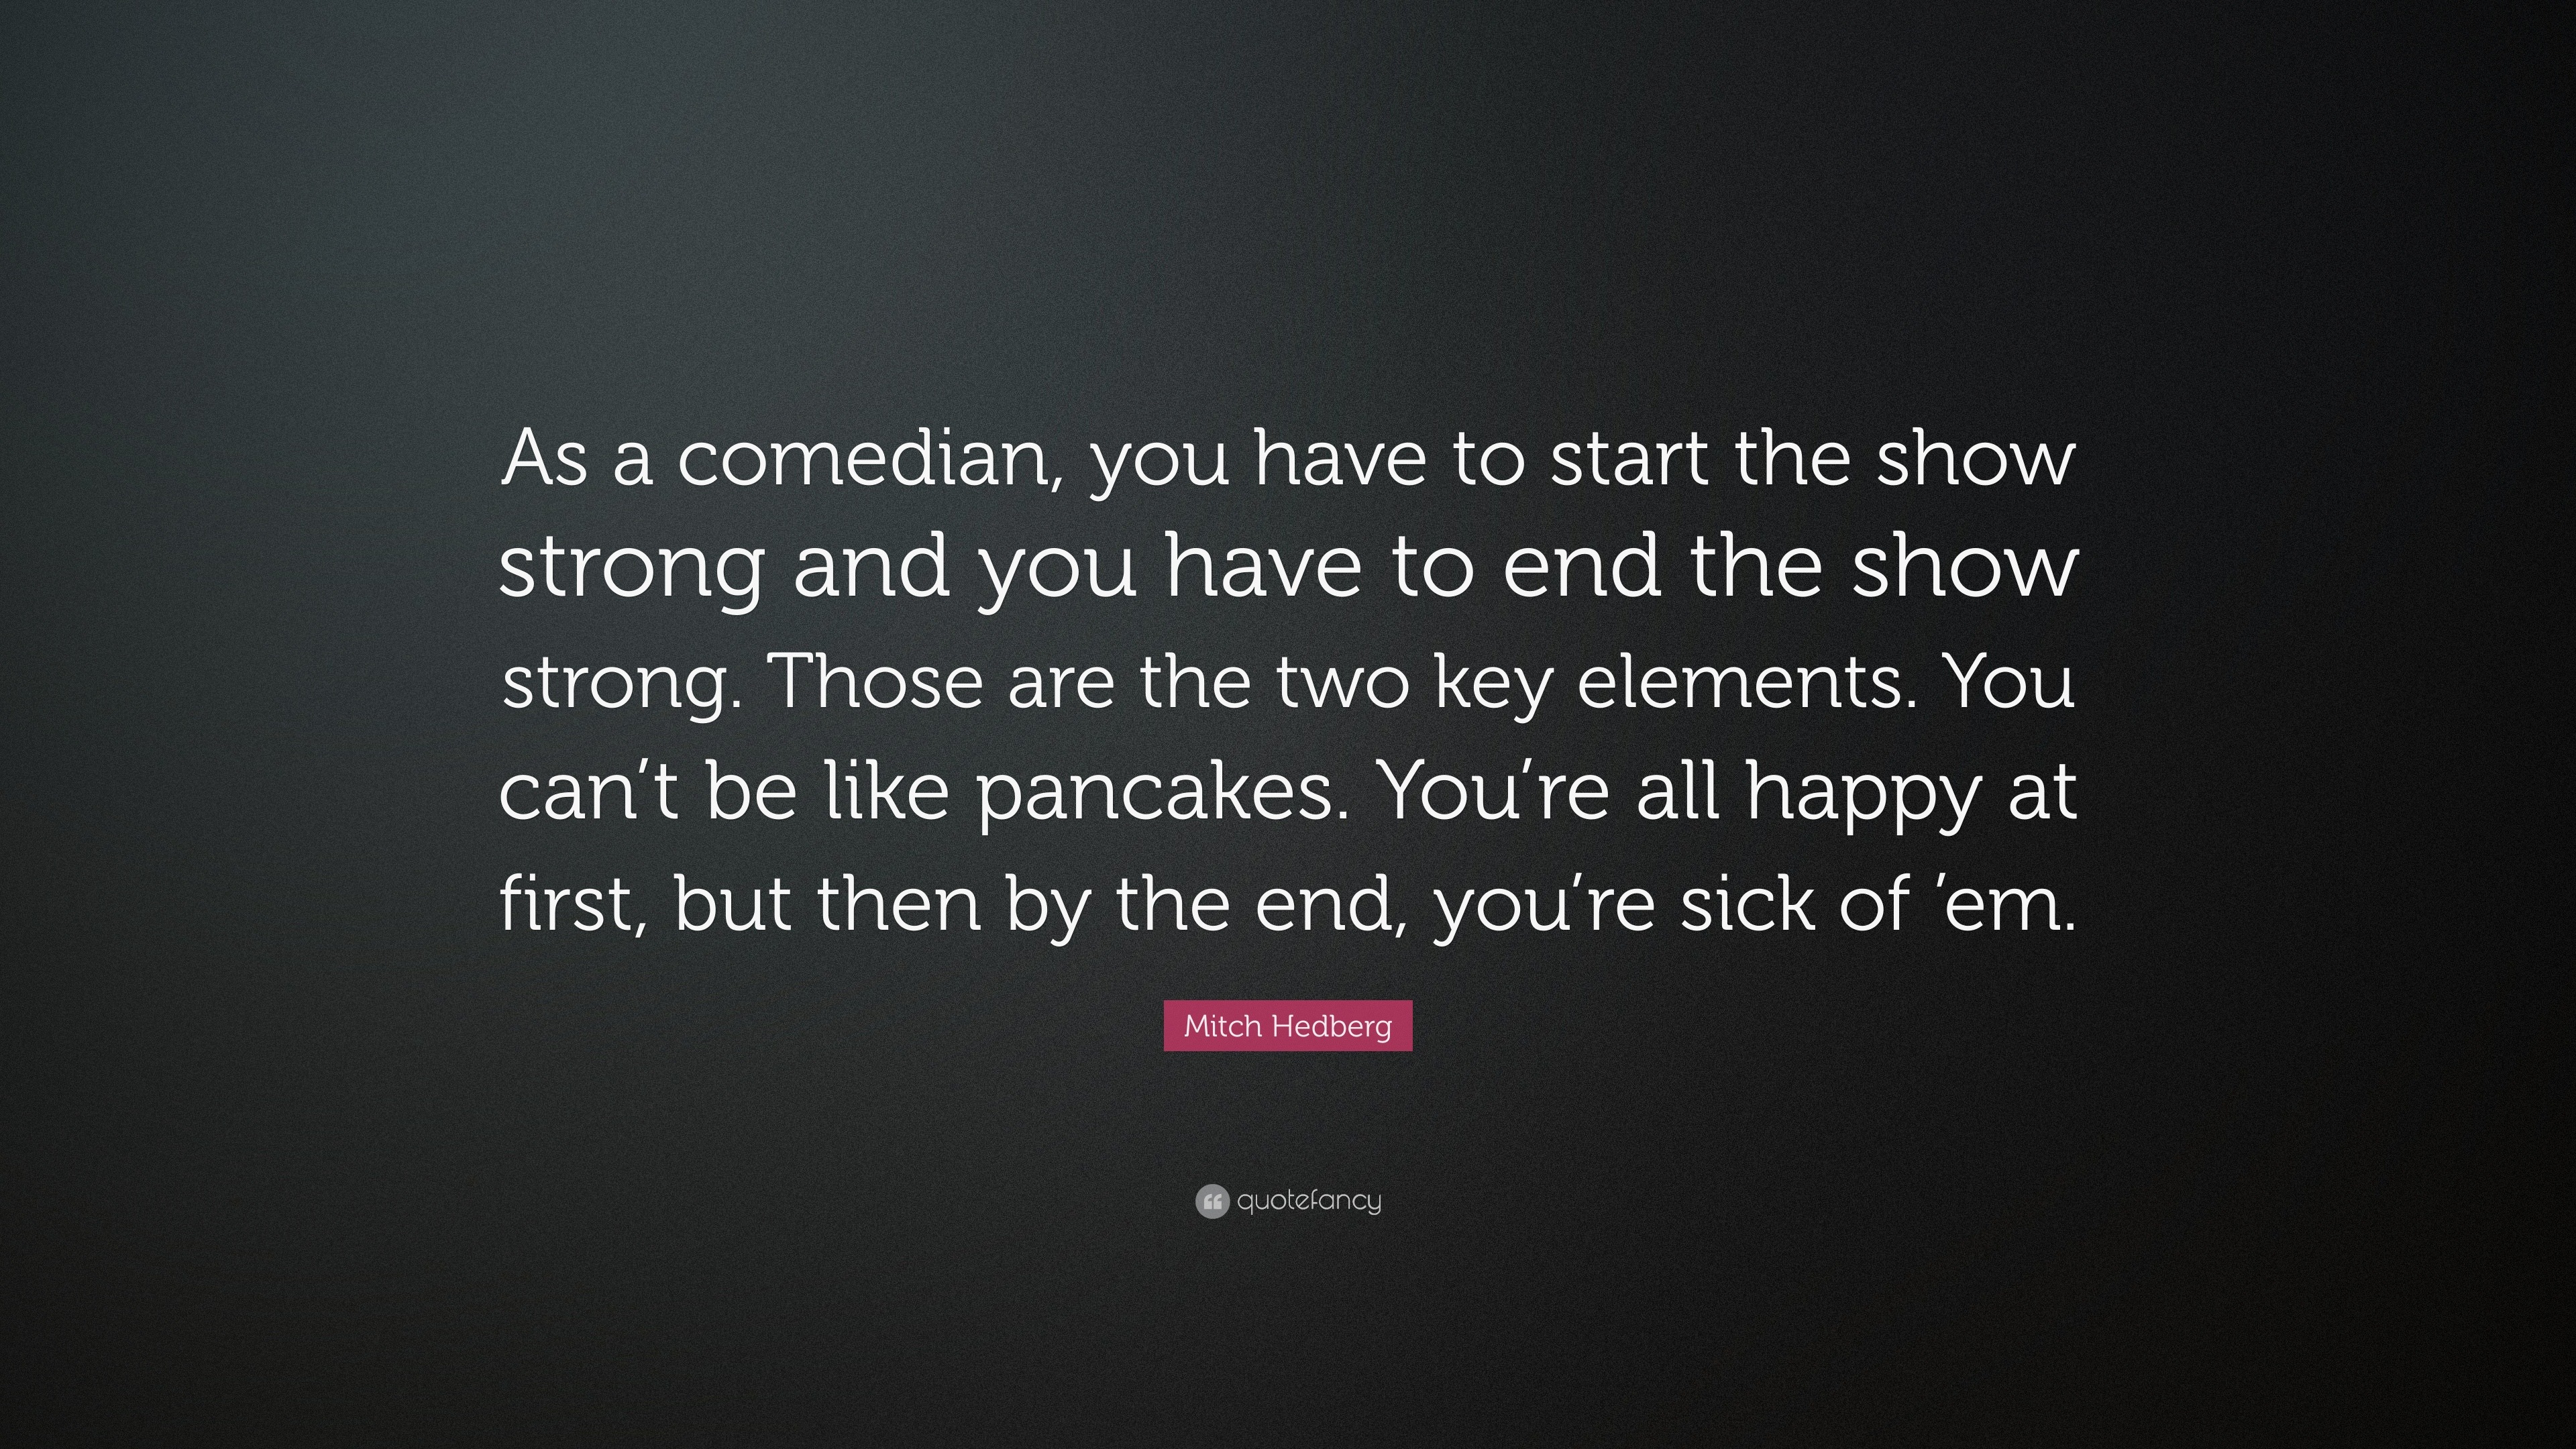 517116-Mitch-Hedberg-Quote-As-a-comedian-you-have-to-start-the-show.jpg